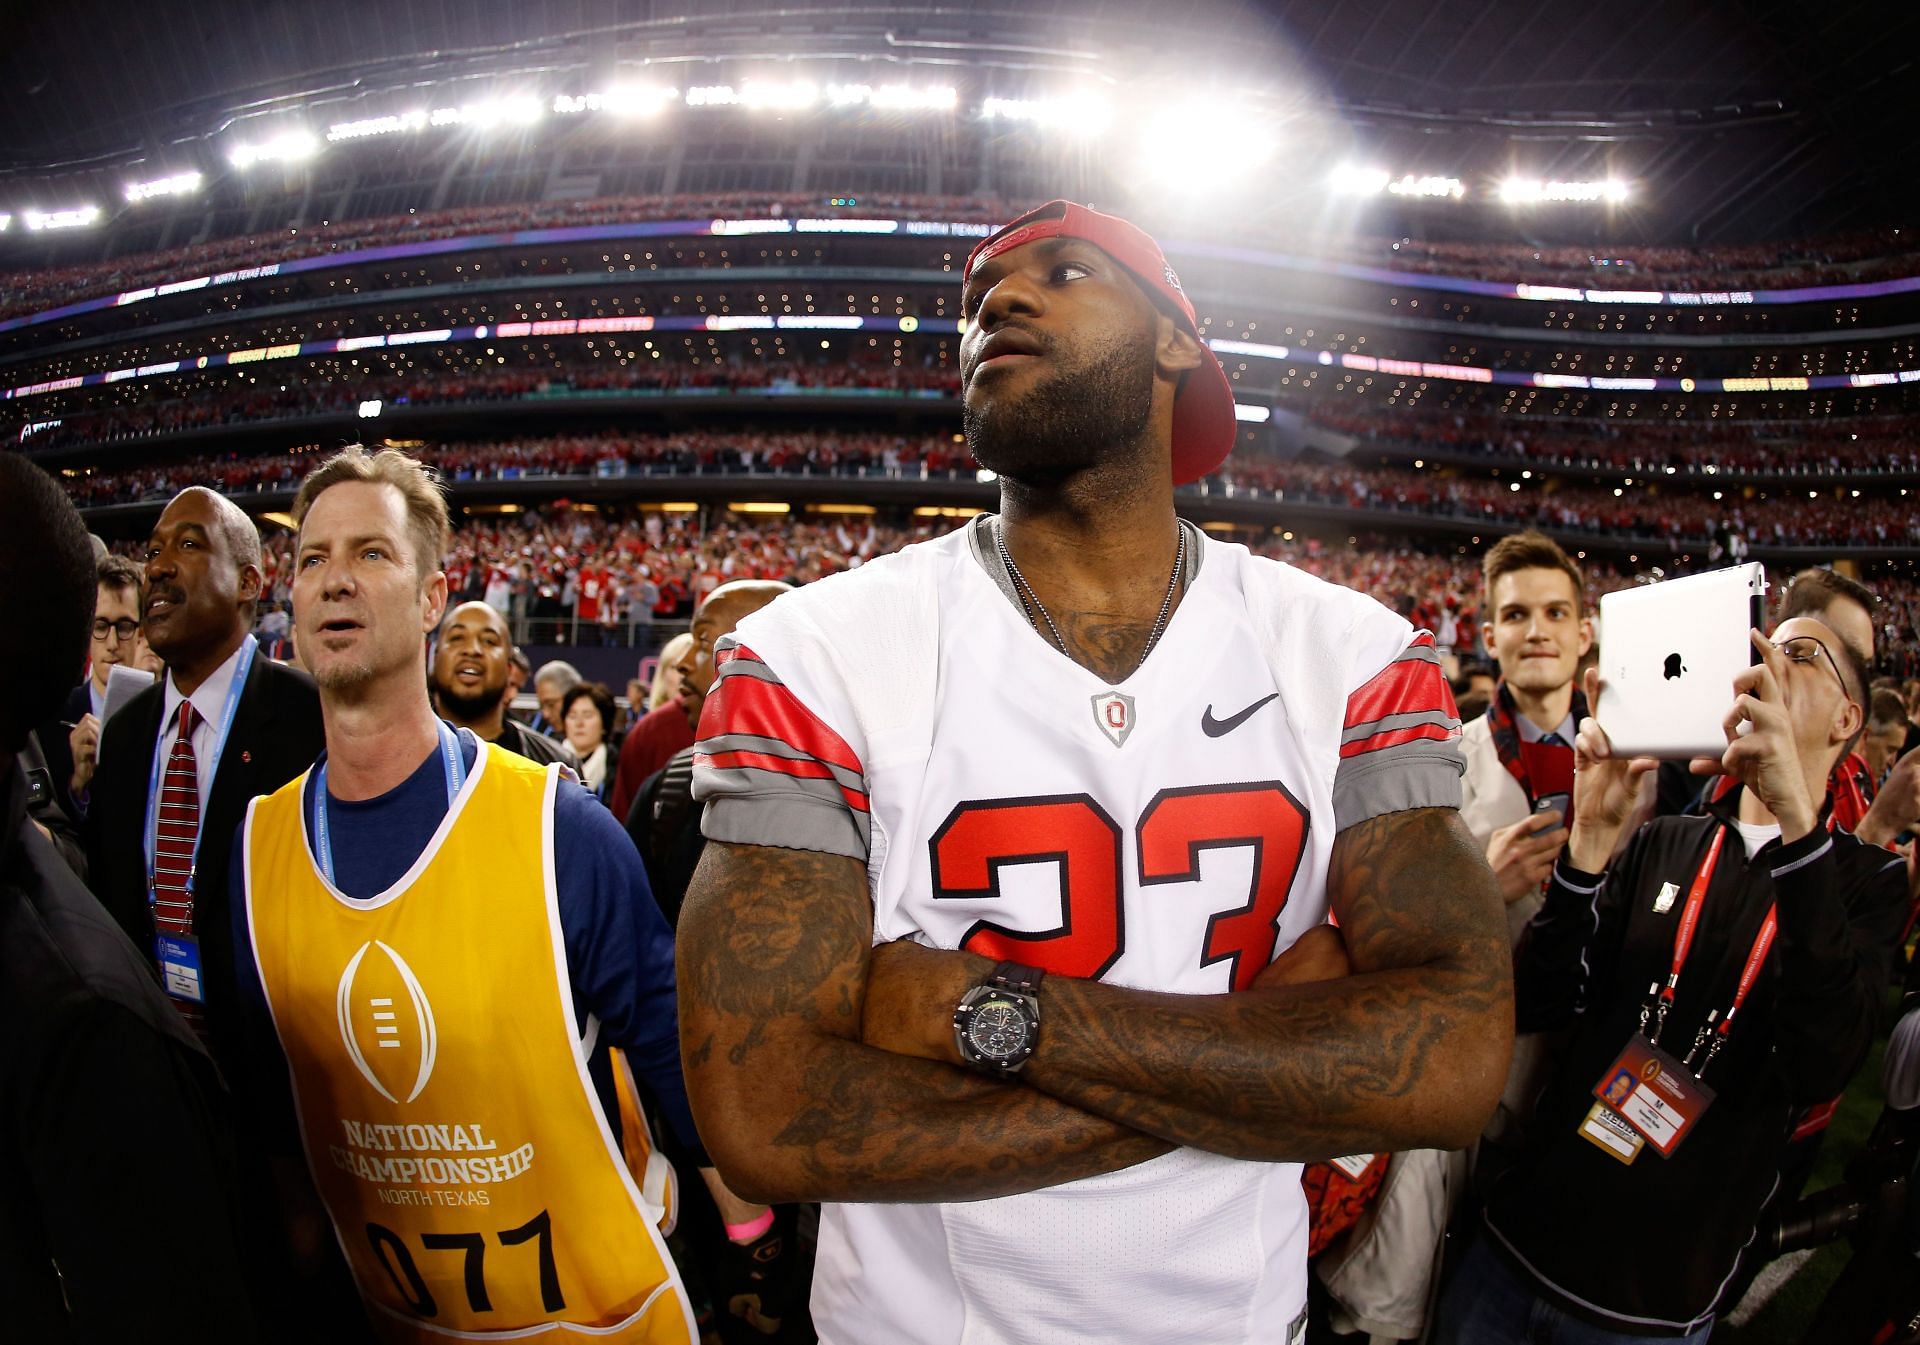 LeBron James at the National Championship between Oregon and Ohio State in 2015